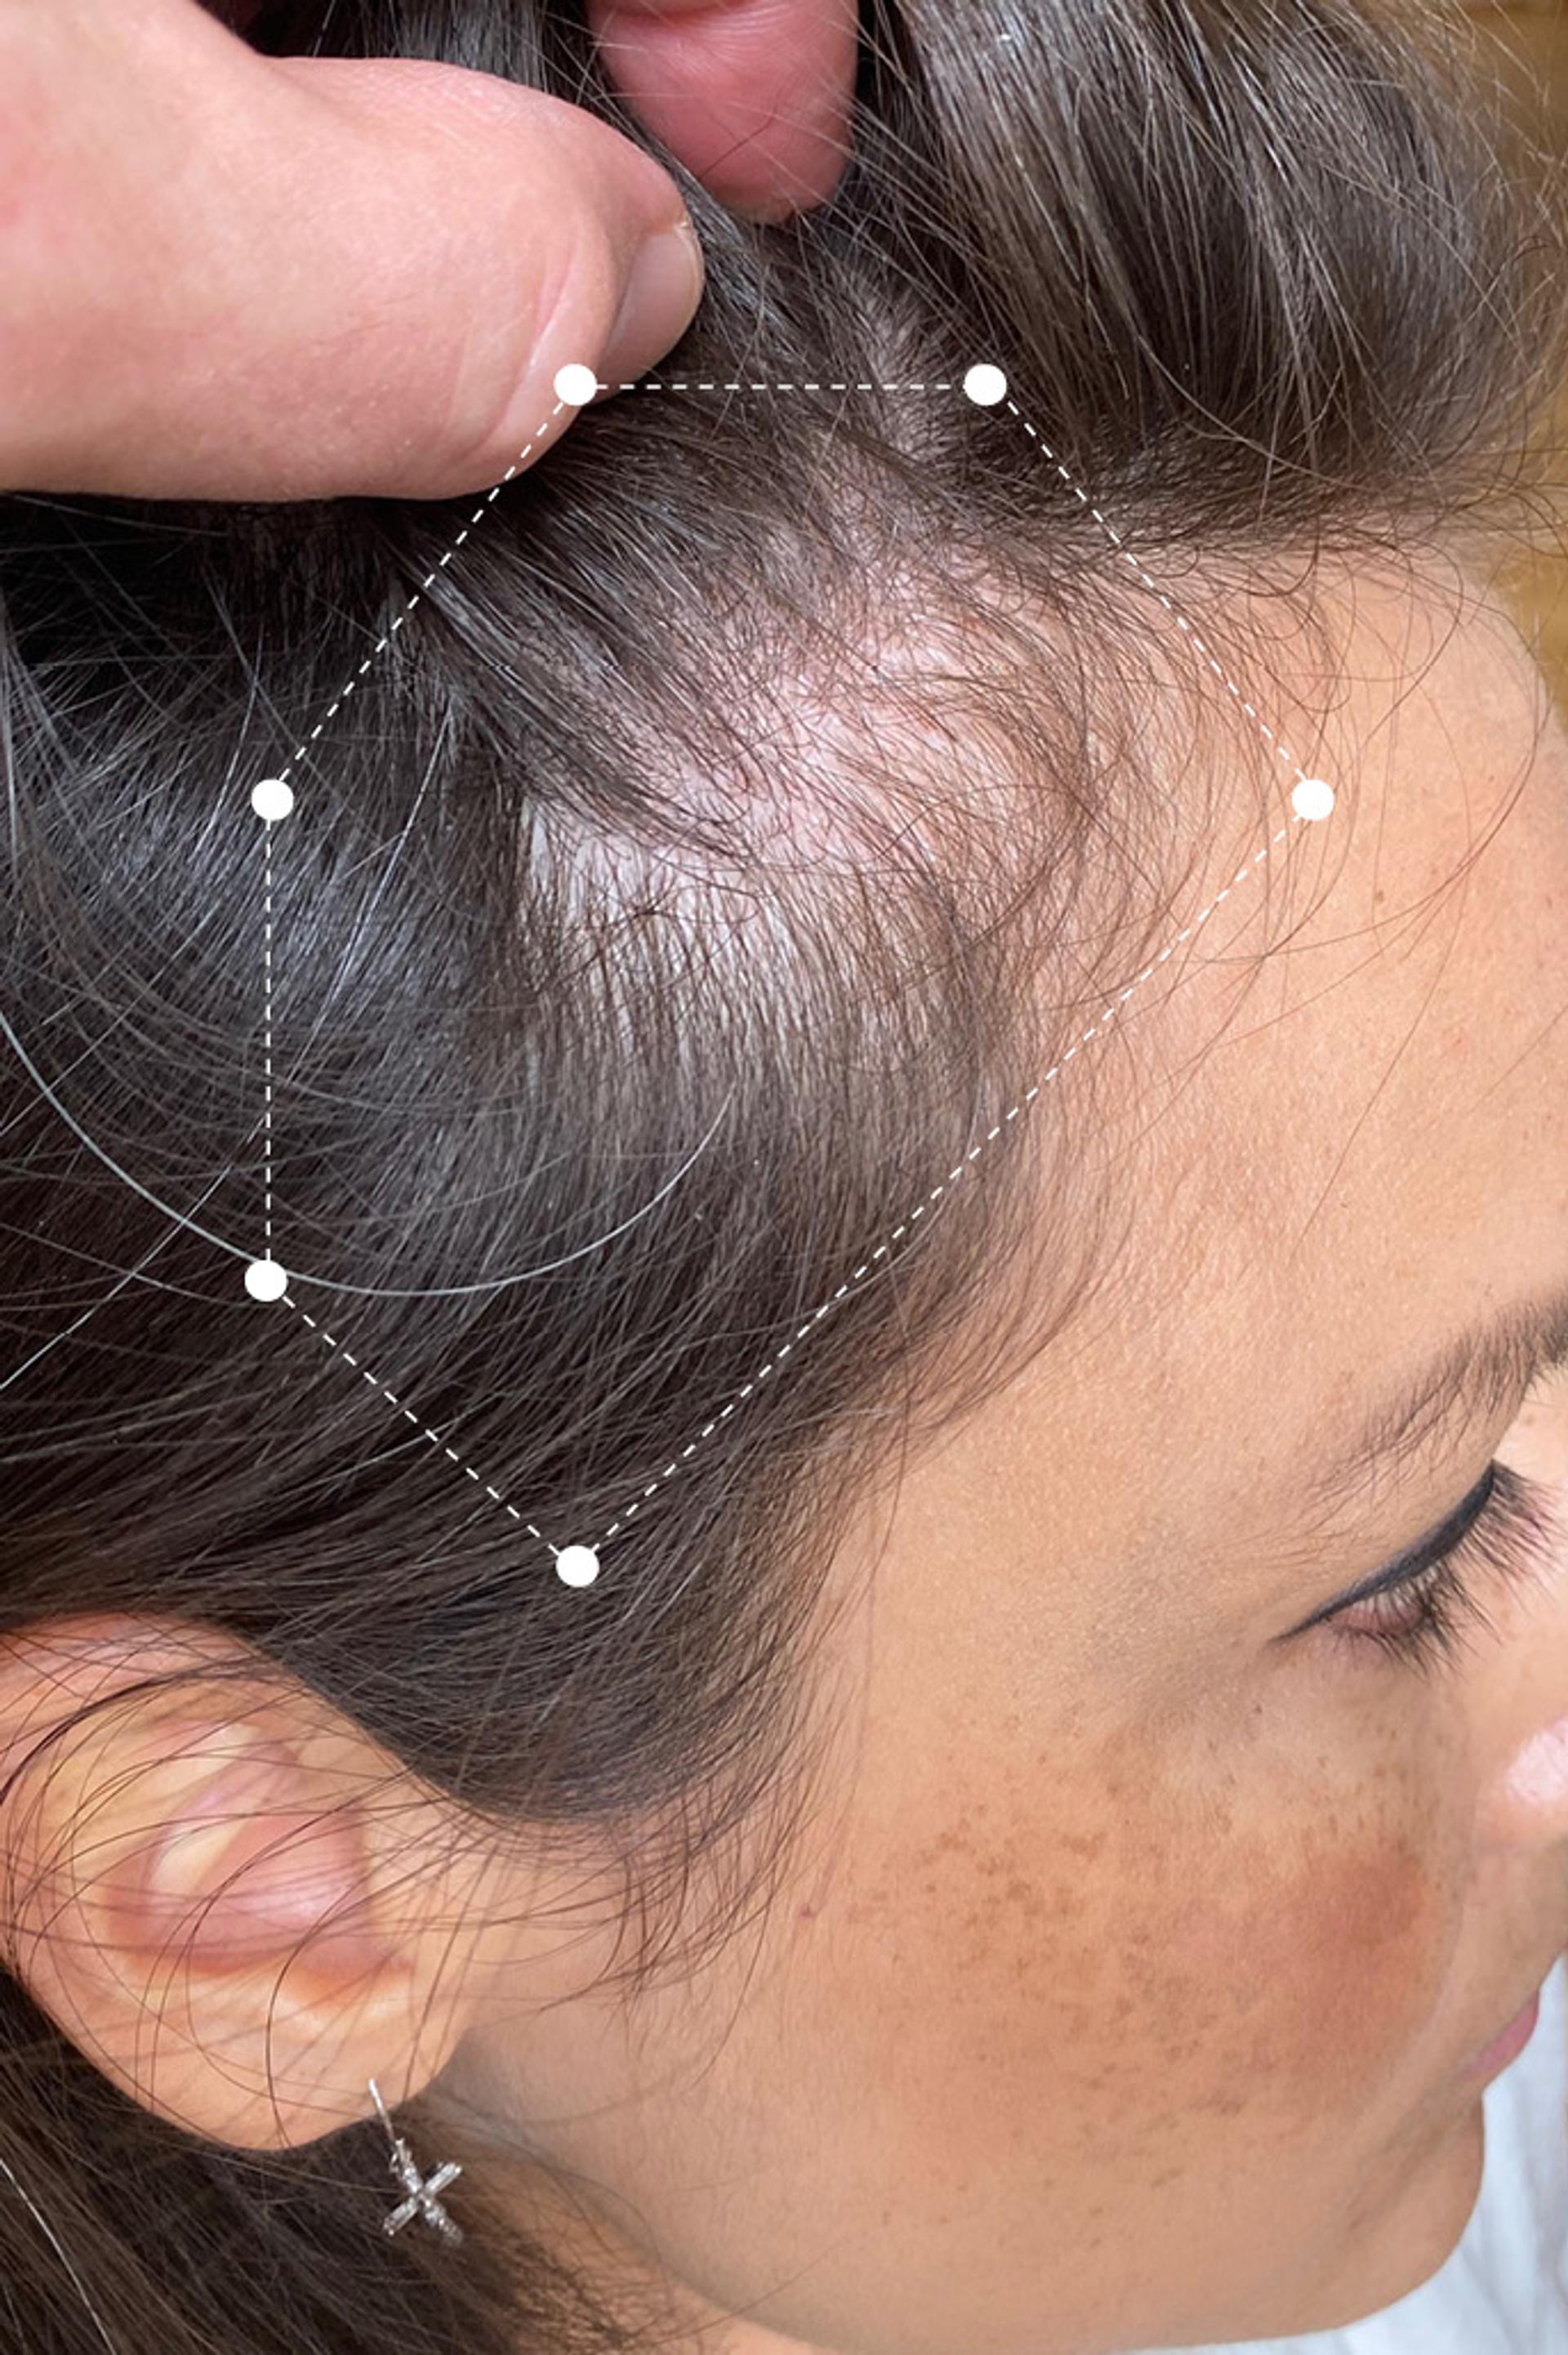 Picture of Scalp and Hair Thinning near Temple Before using the Harklinikken Regimen for 23 months